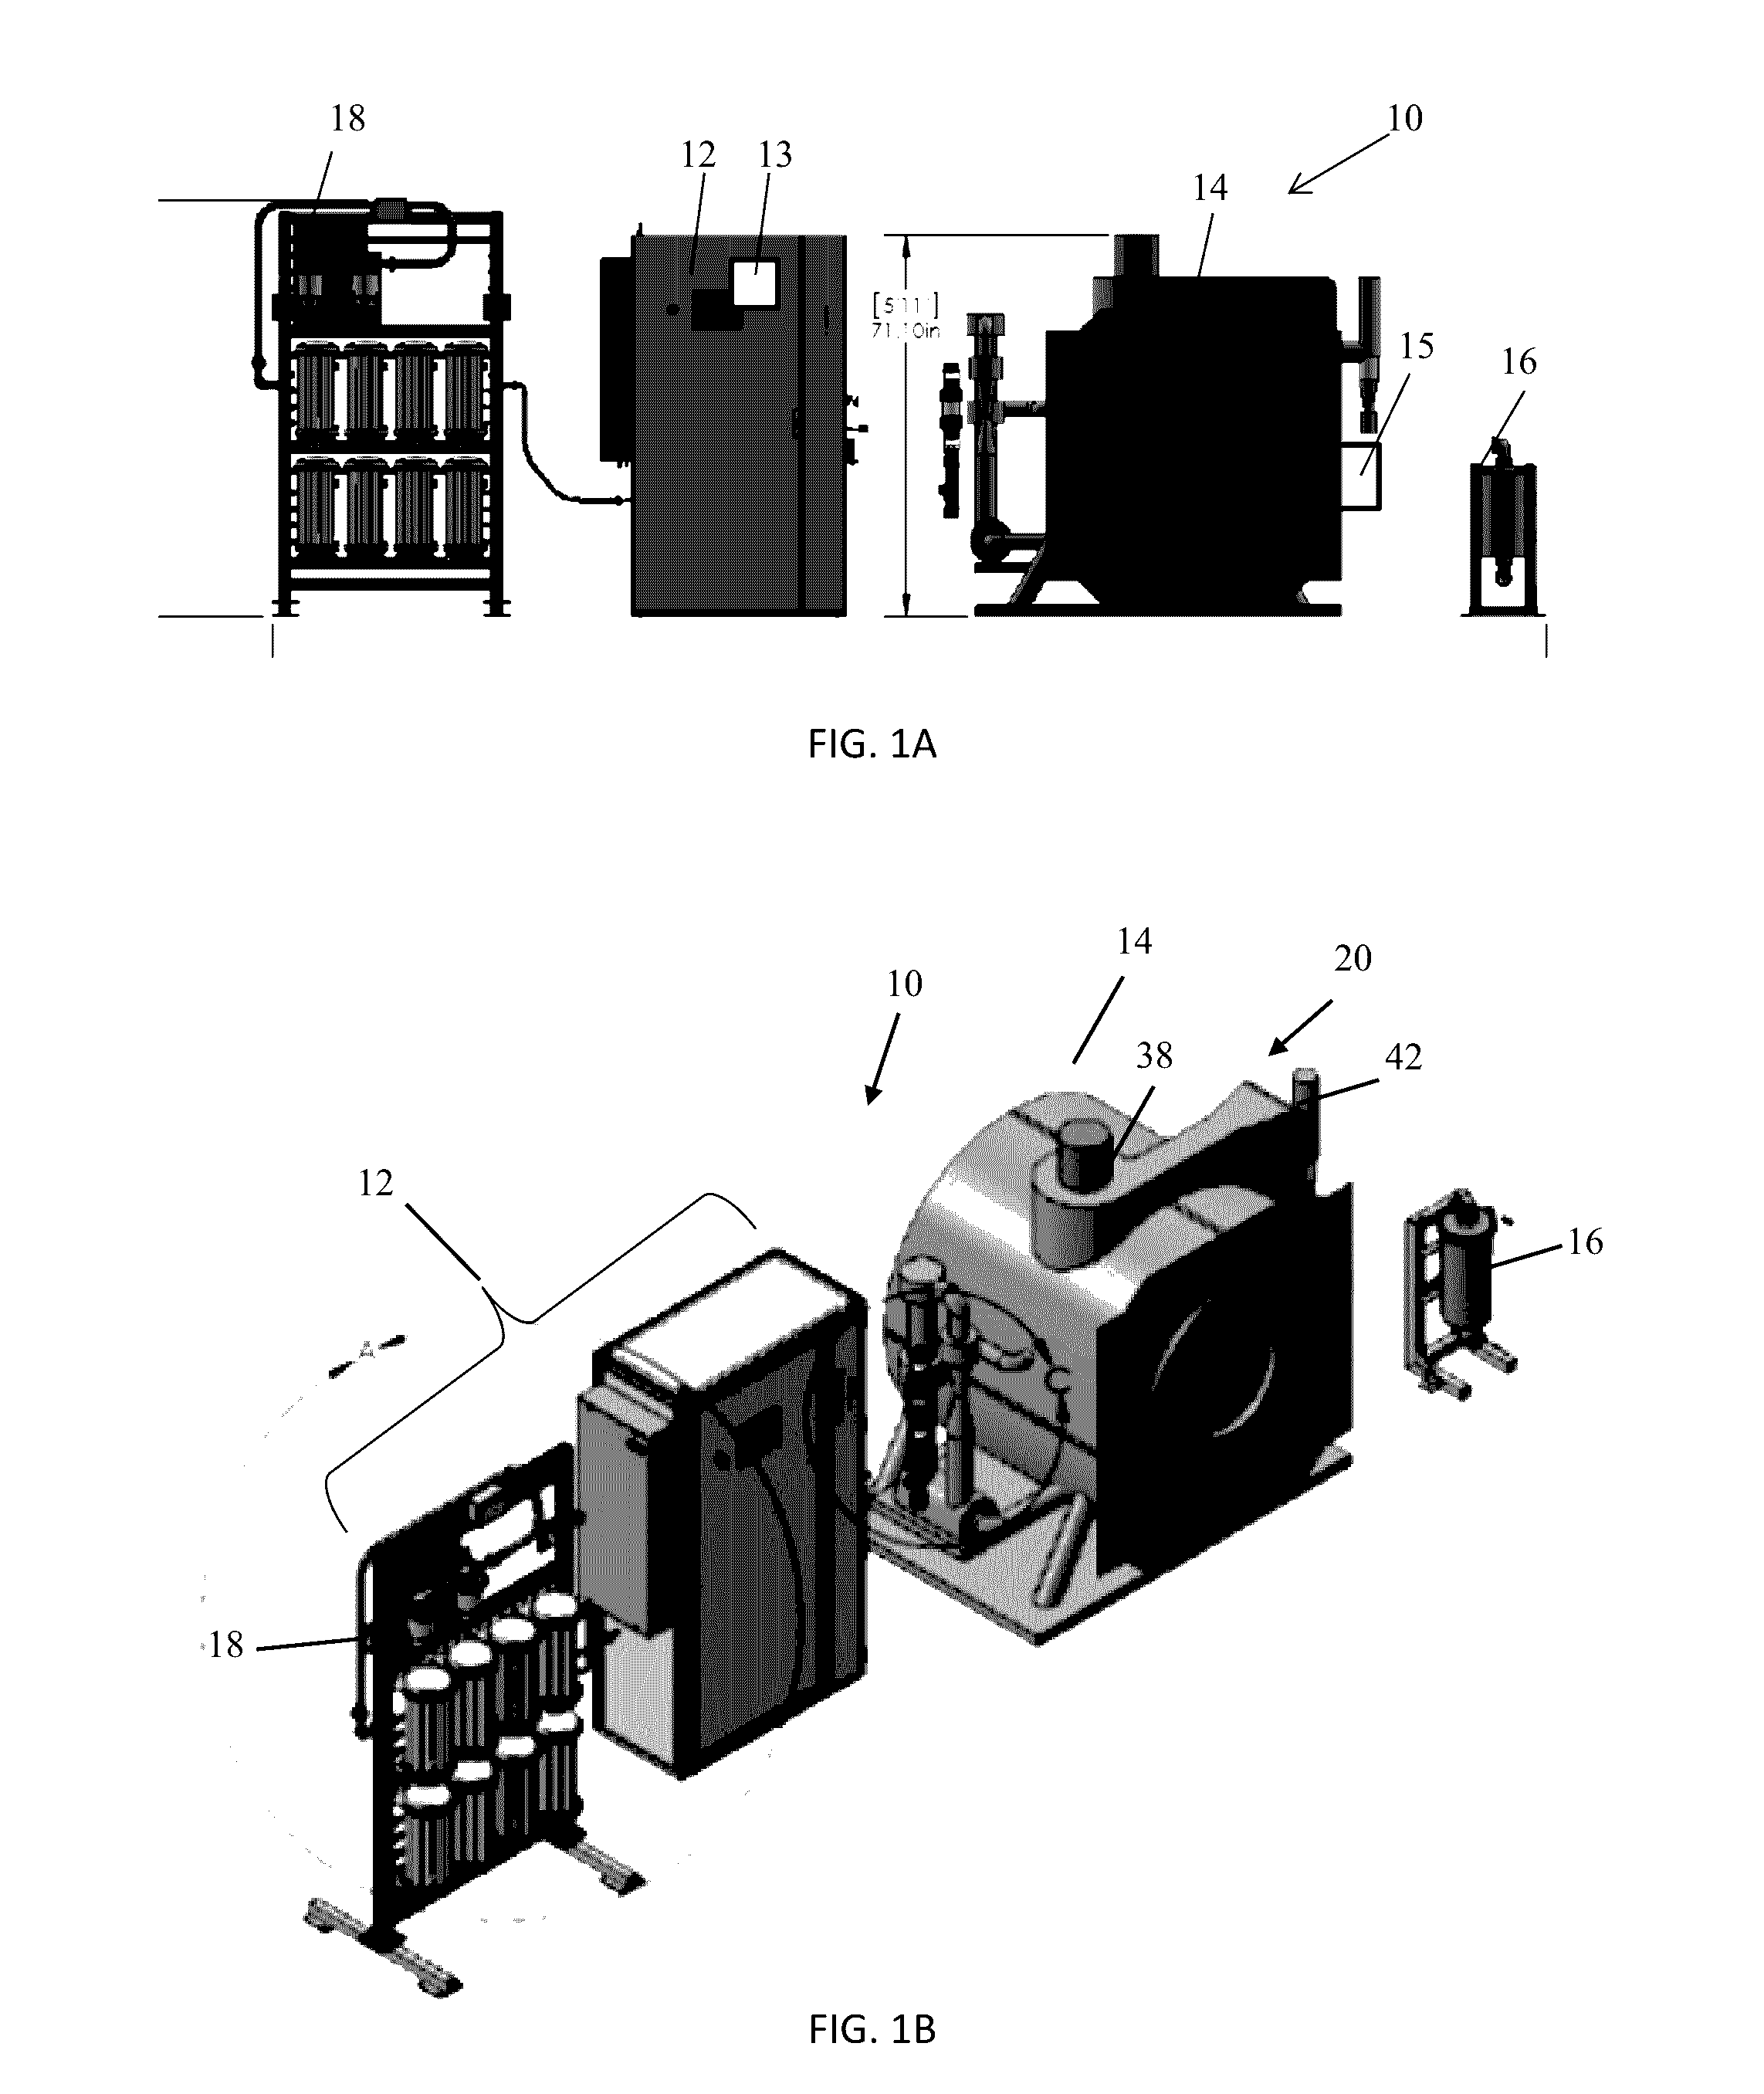 Methods and systems for bleaching textiles